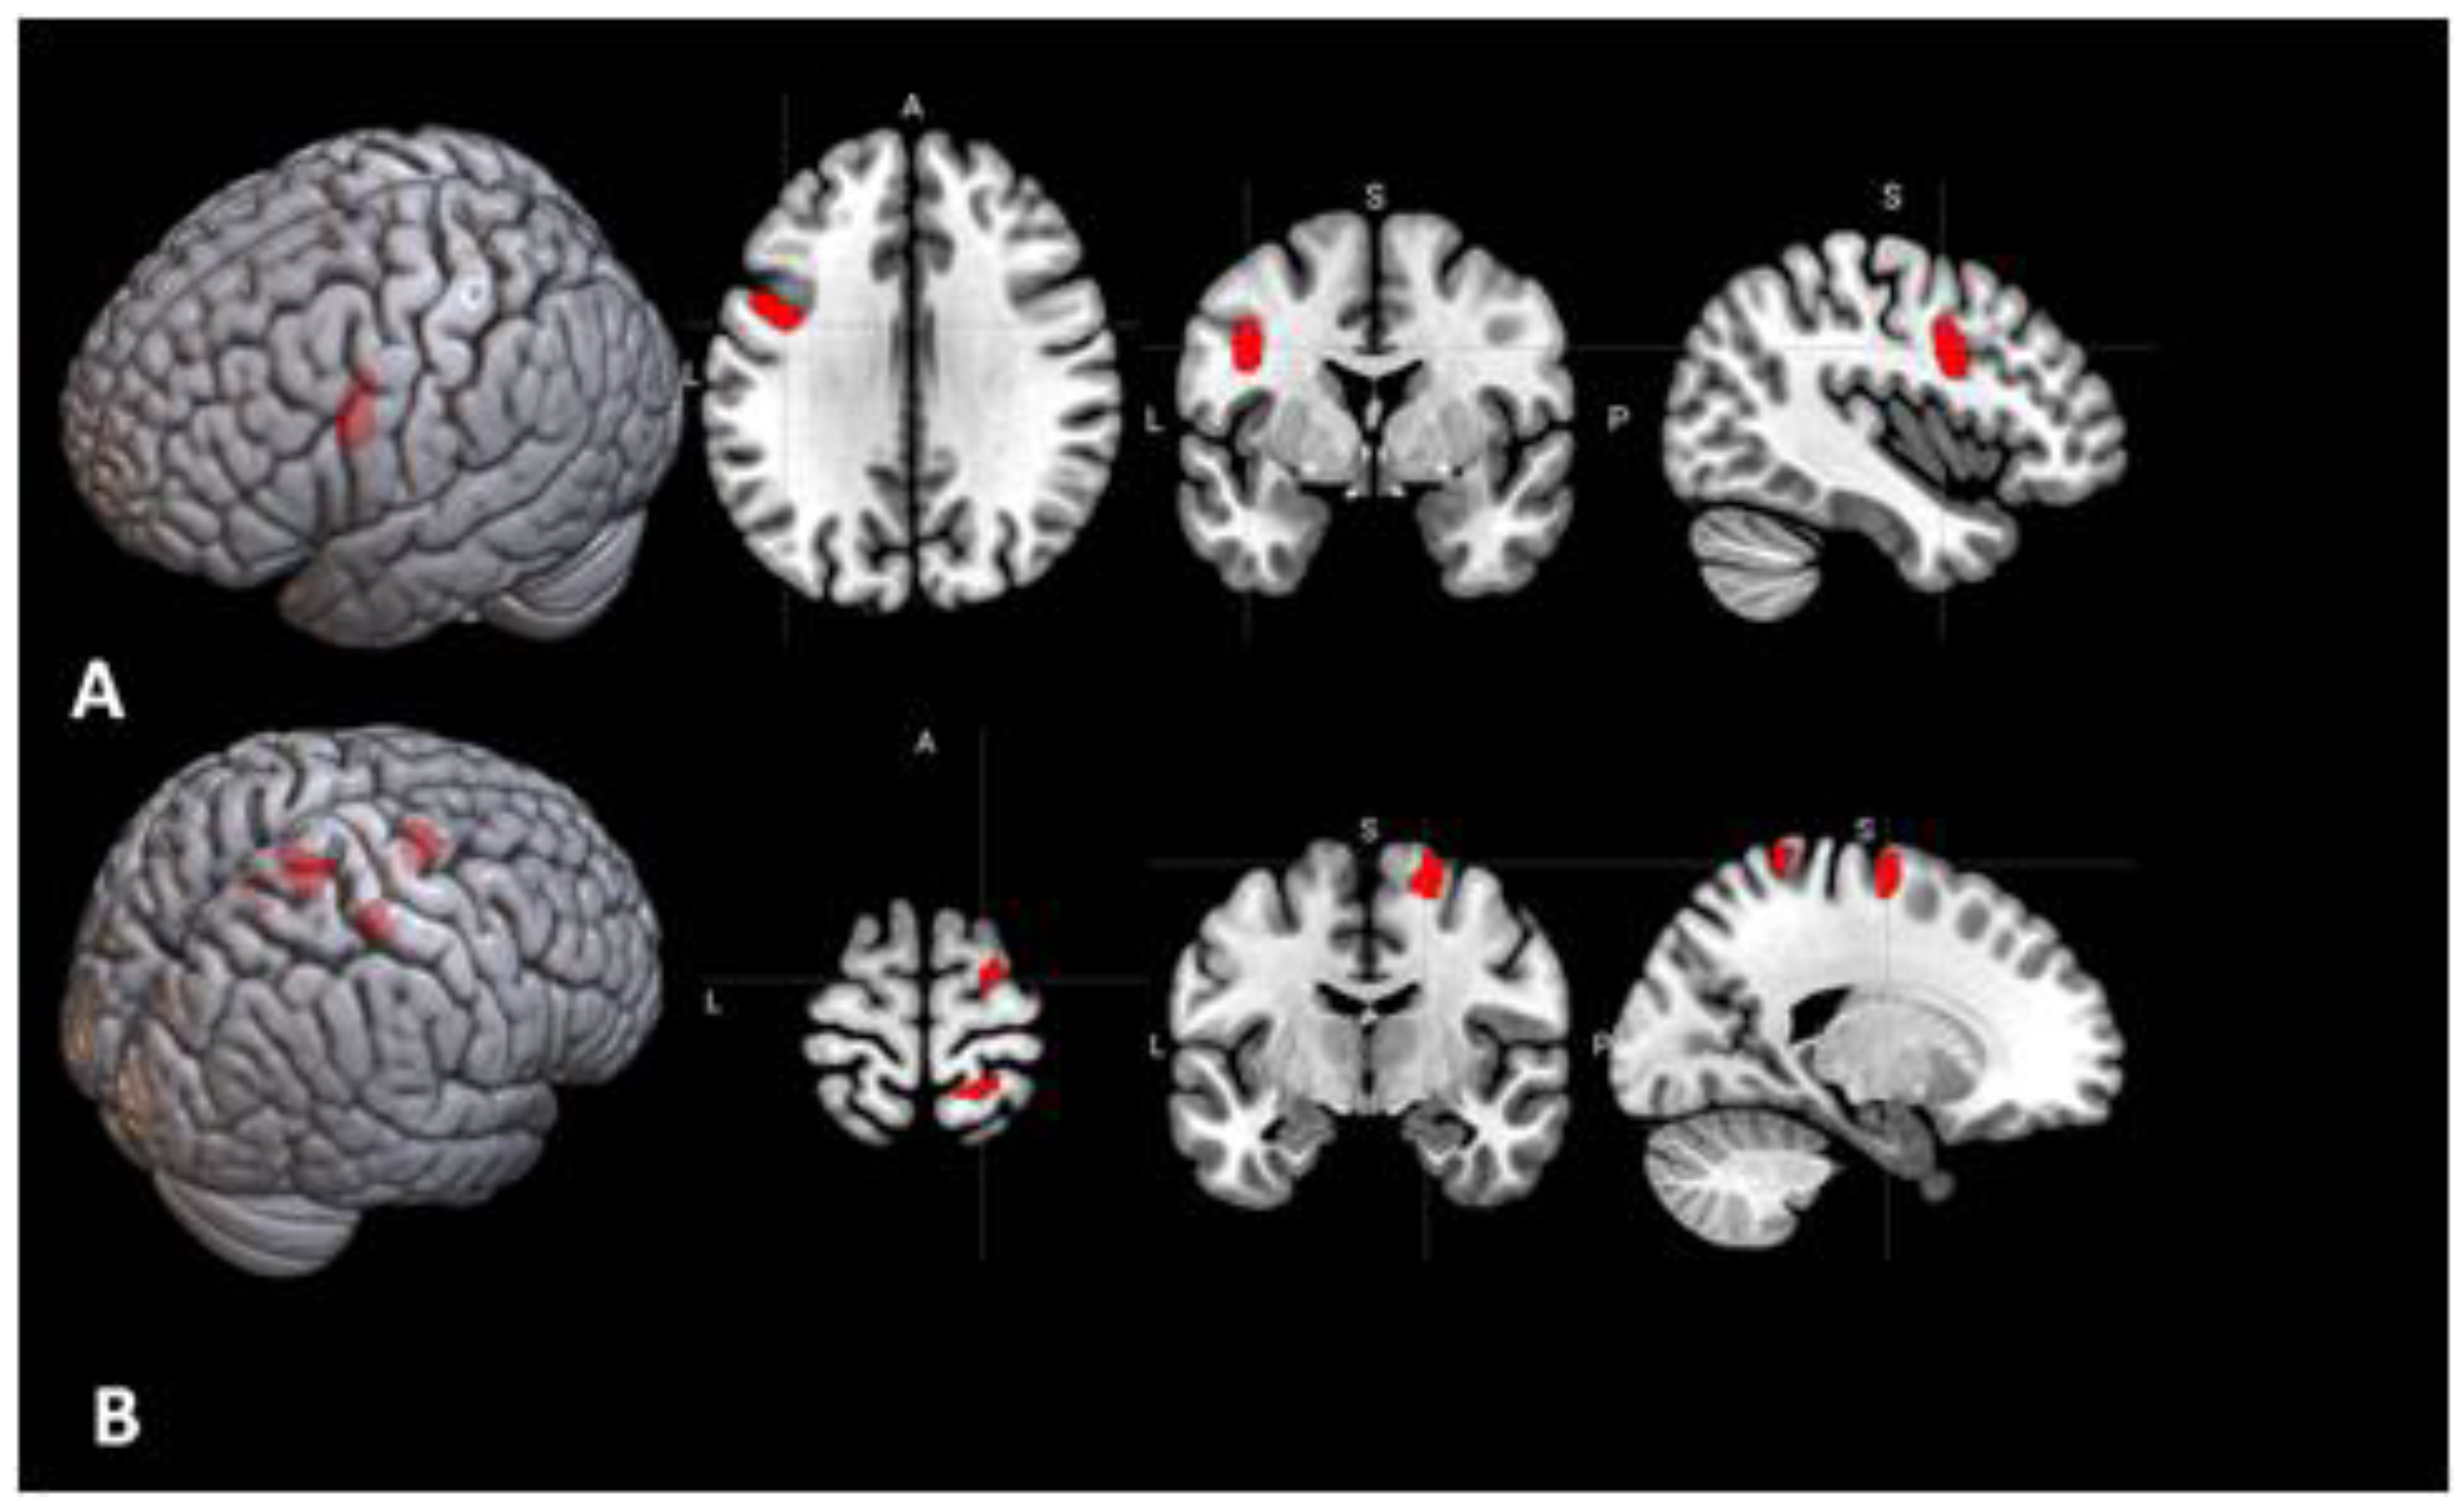 Behavioral Sciences Free Full Text Brain Activations And Functional Connectivity Patterns Associated With Insight Based And Analytical Anagram Solving Html